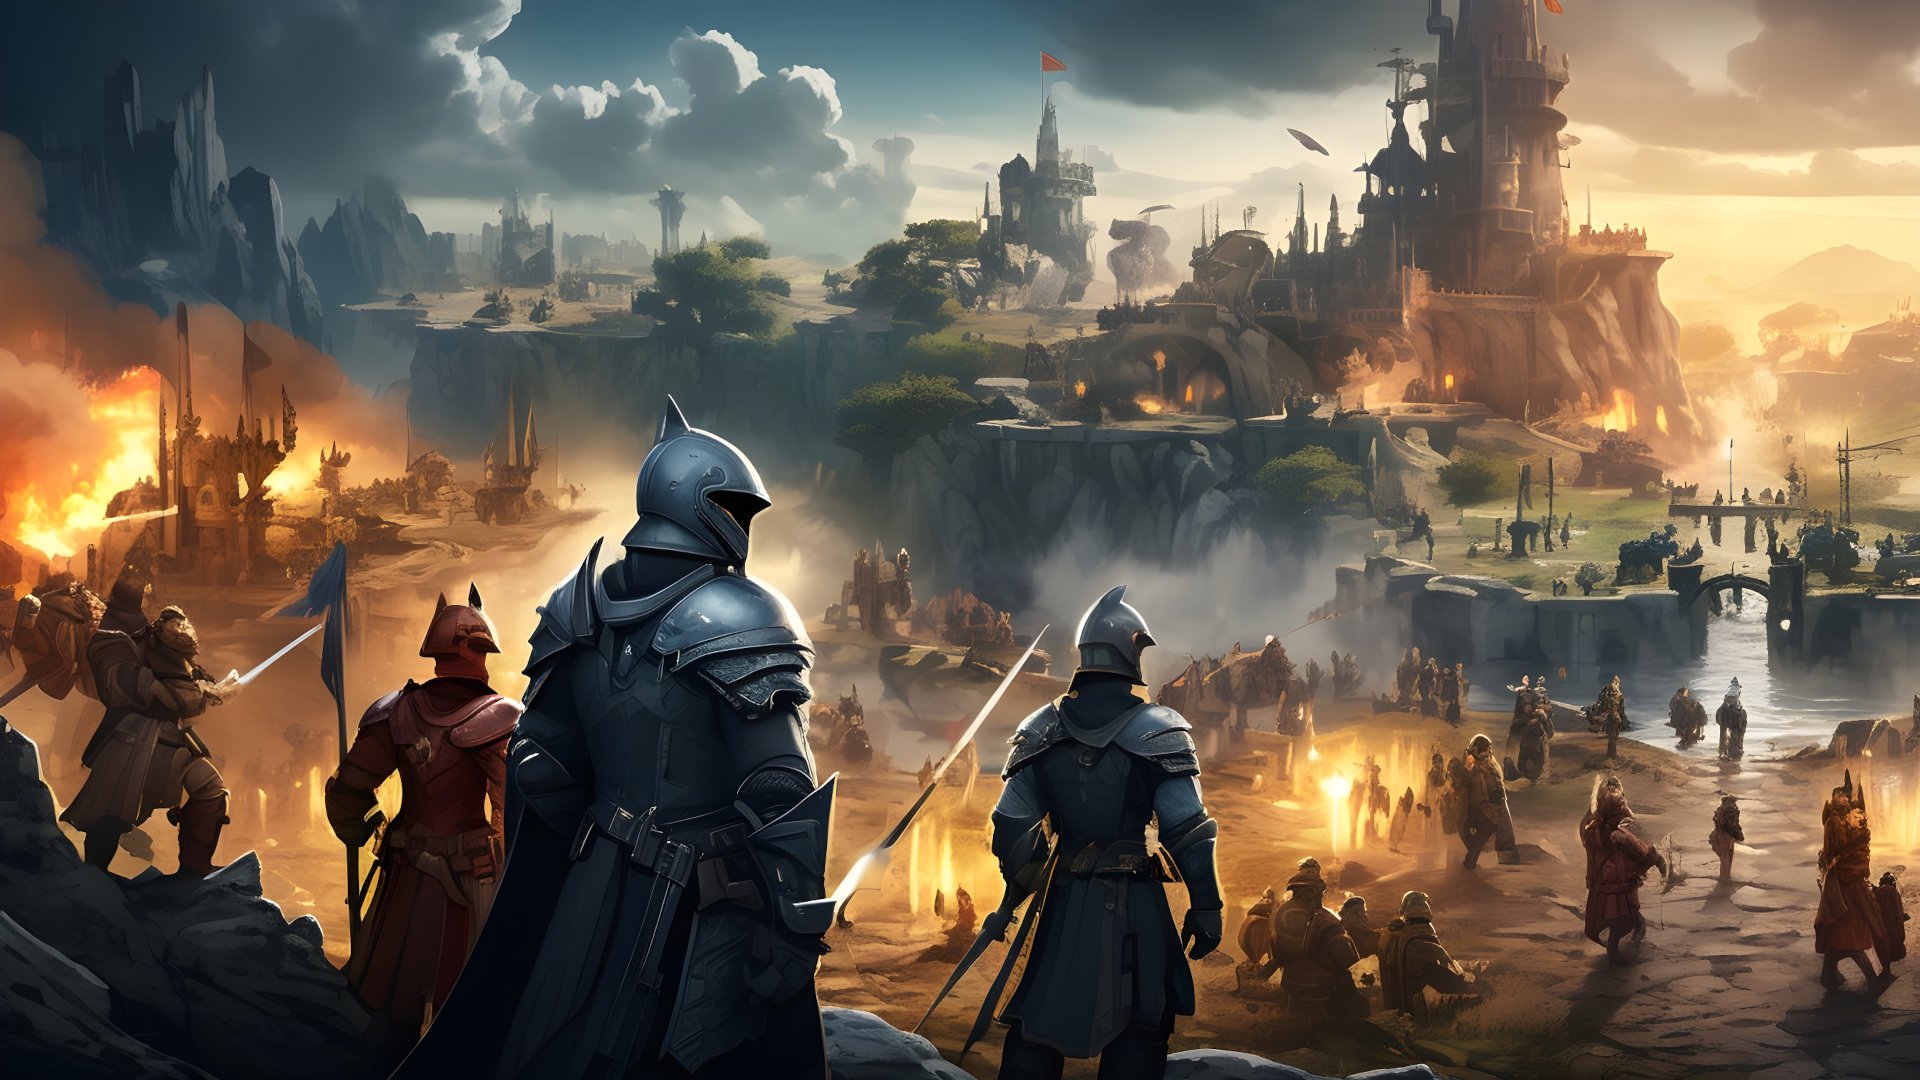 Top Strategy Games of 2013 - 2023